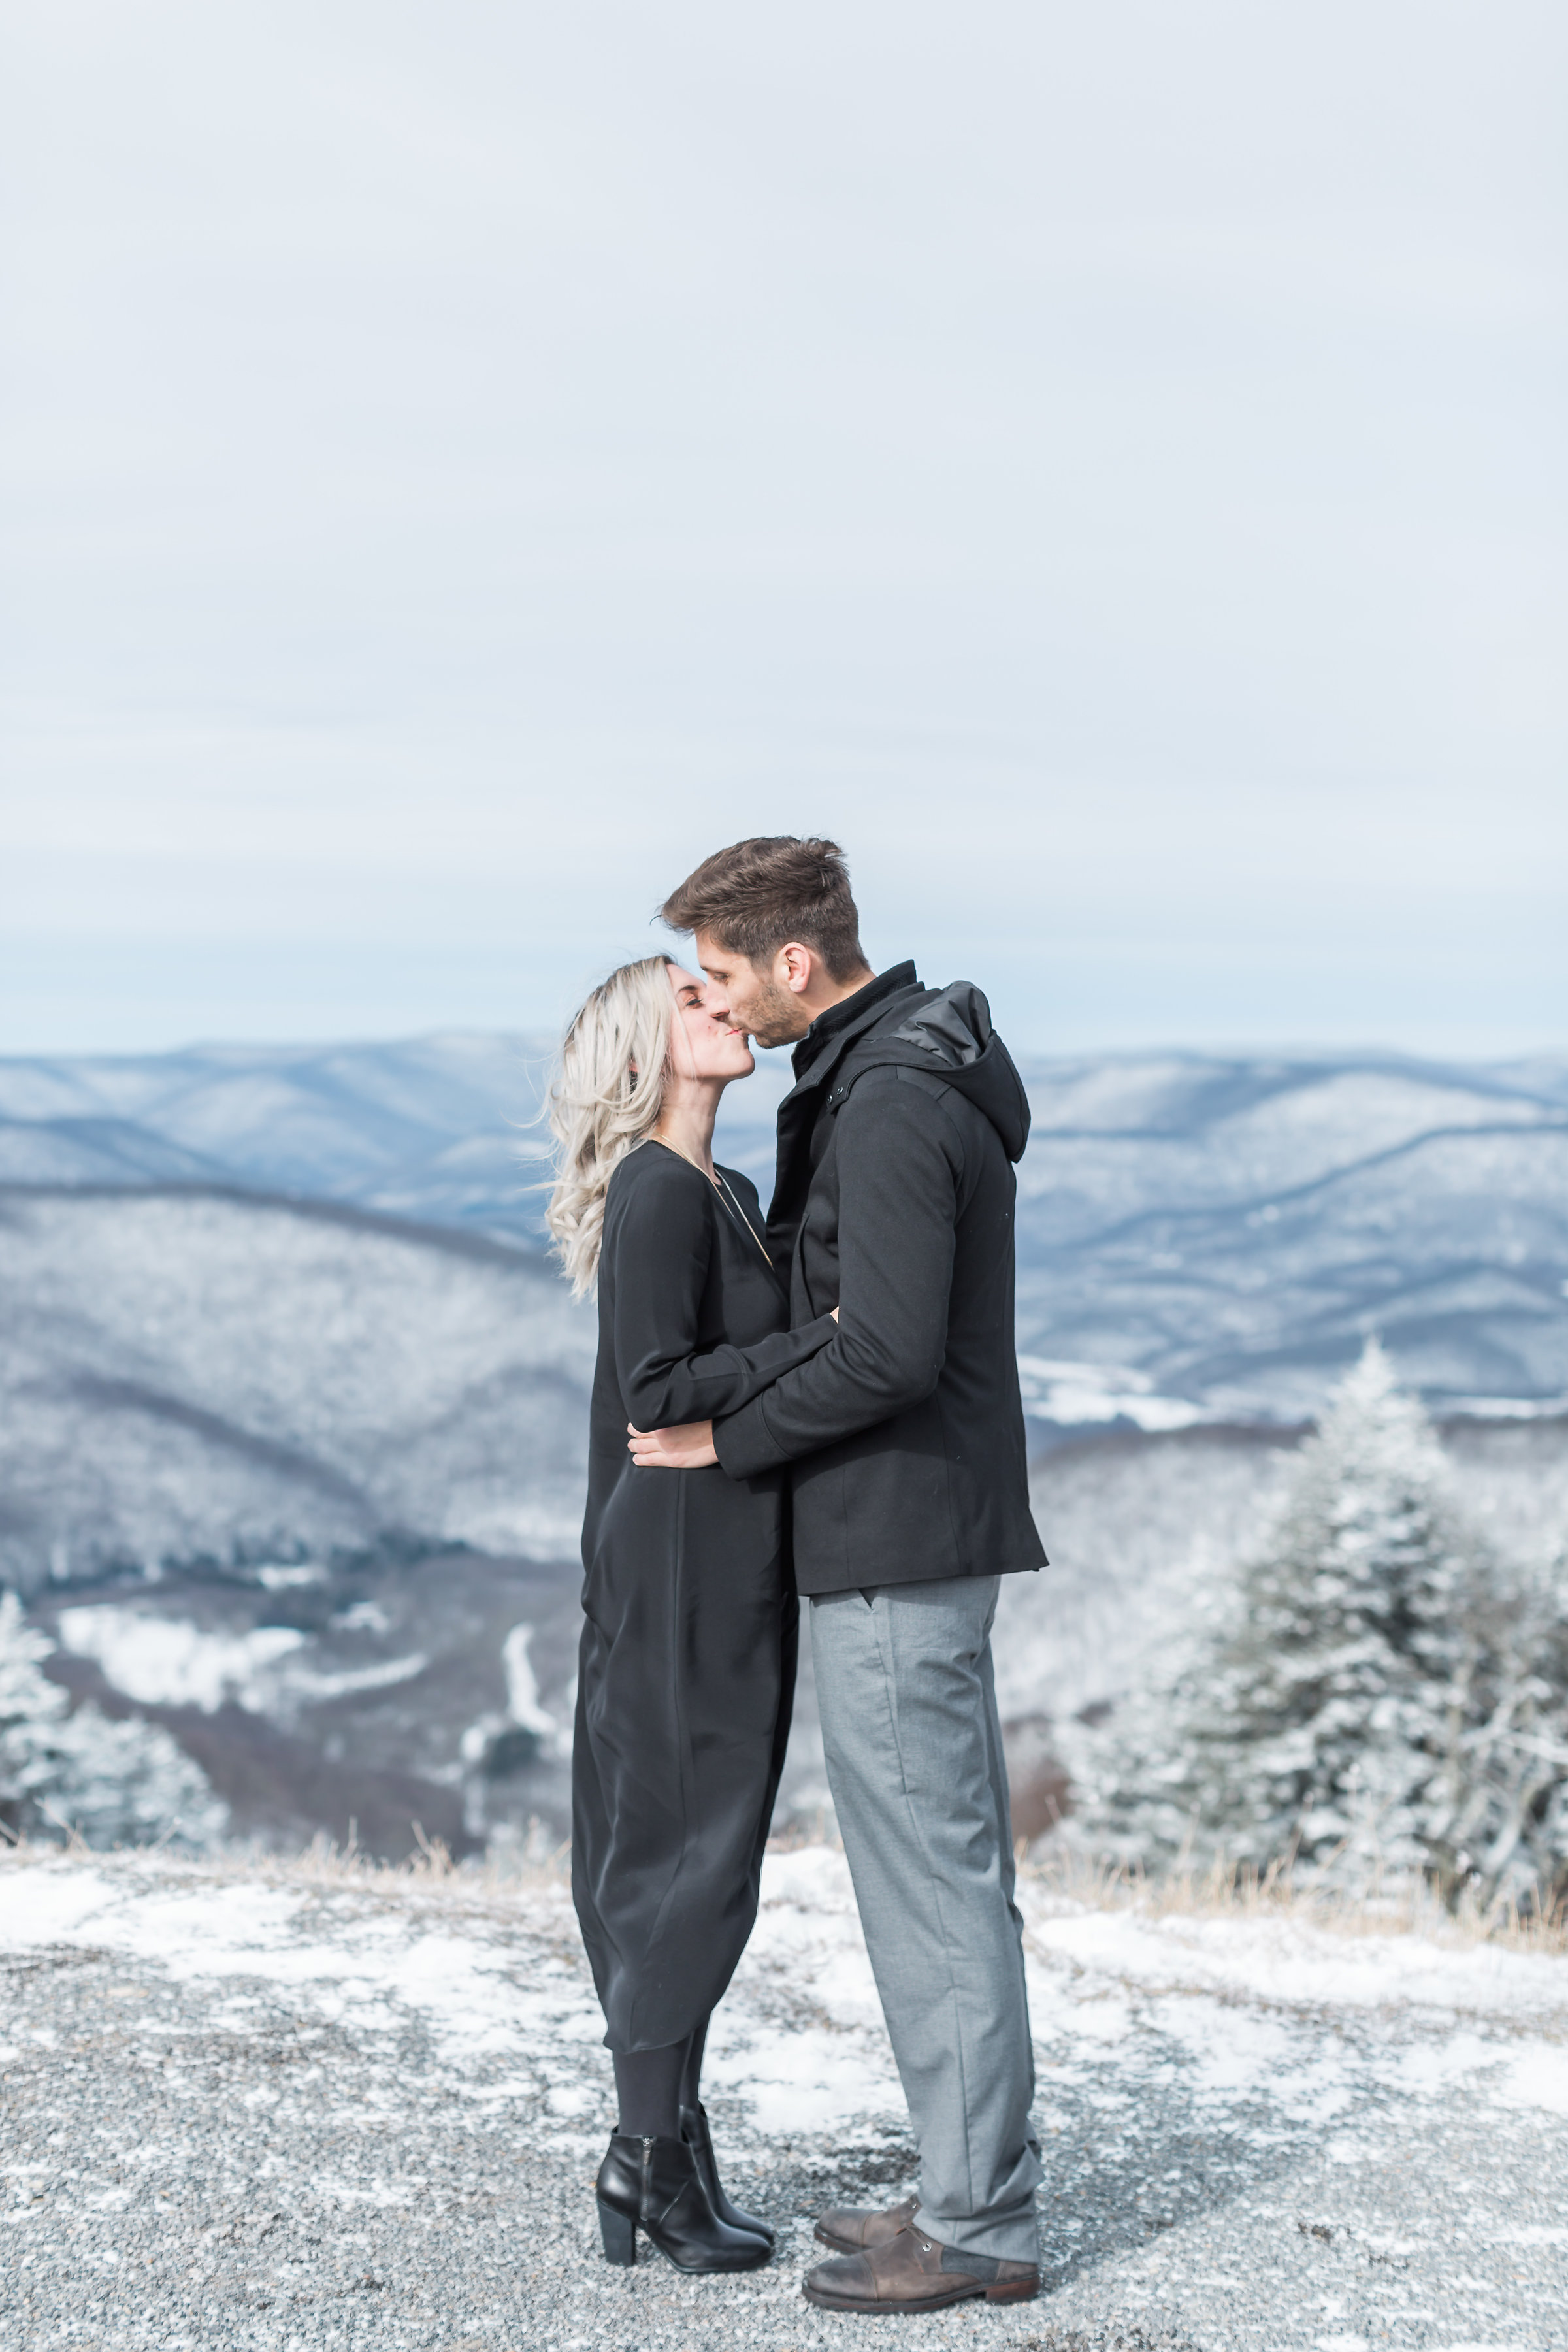 snowshoe mountain resort west virginia DC couple engagement wintery weekend getaway snow engagement snowy engagement